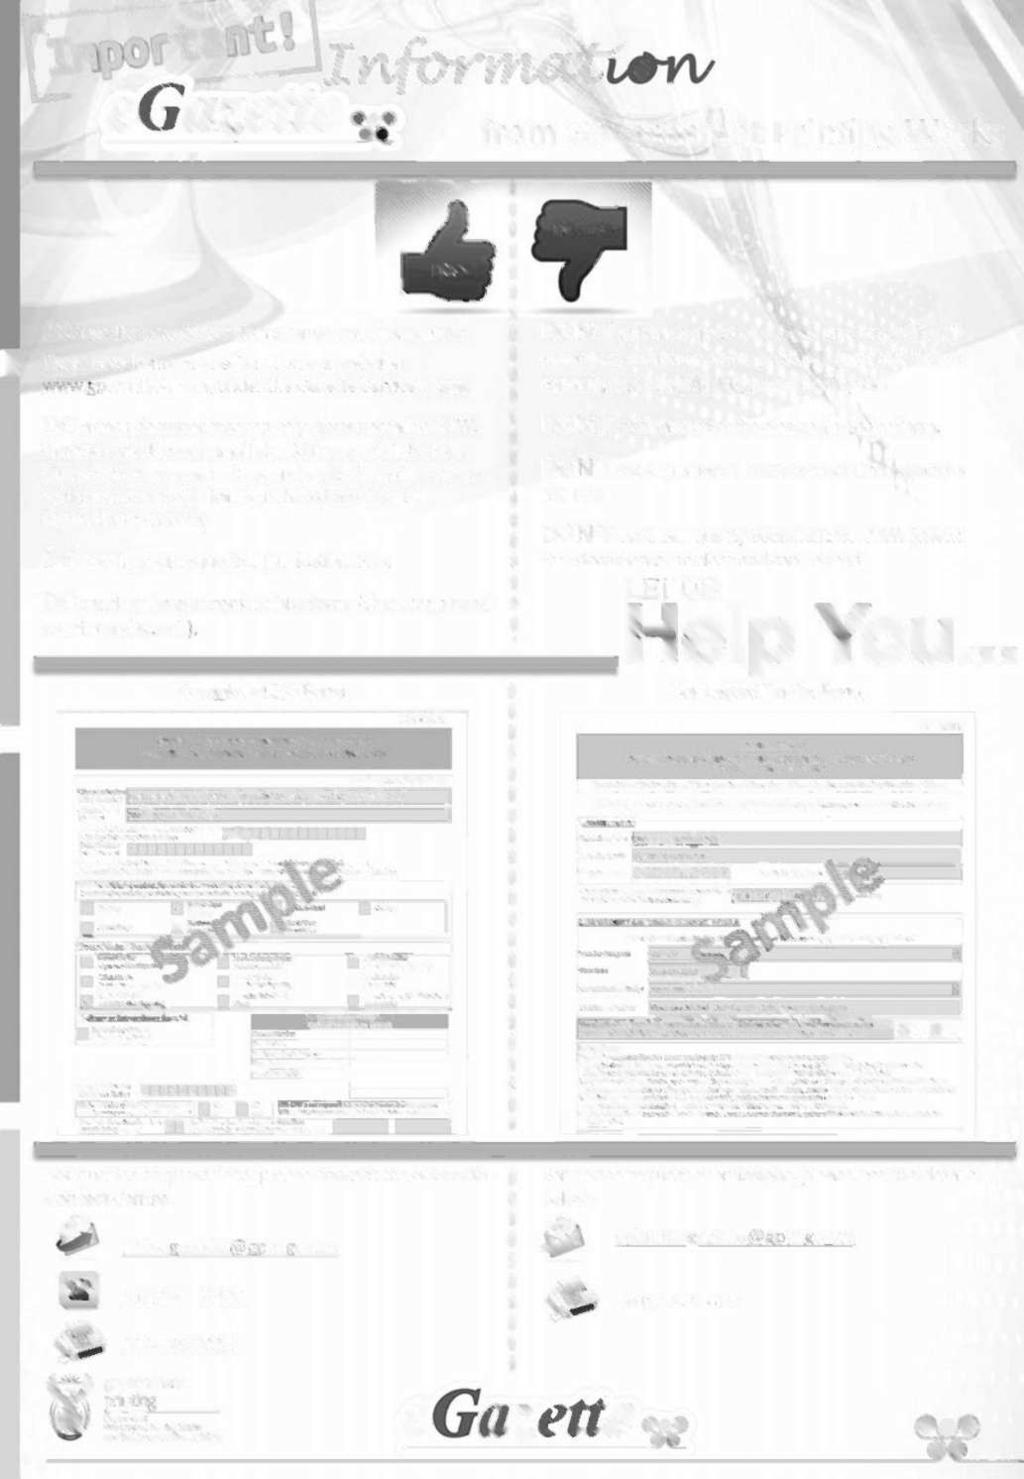 2 No. 38601 GOVERNMENT GAZETTE, 25 MARCH 2015 egazette I nitheittaruniev from Government Printing Works DON'TS DO use the new Adobe Forms for your notice request.